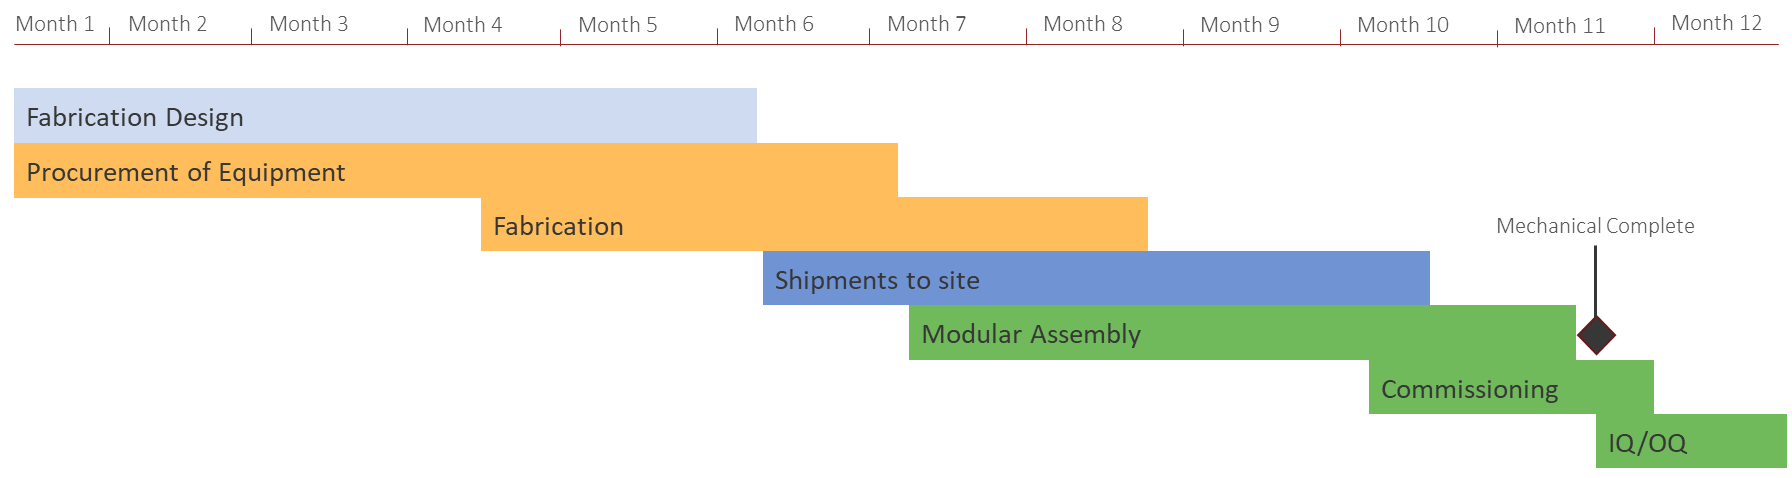 Figure 1: Facility timeline example based on Modular Bio Solutions MBS and disposables for bioprocessing